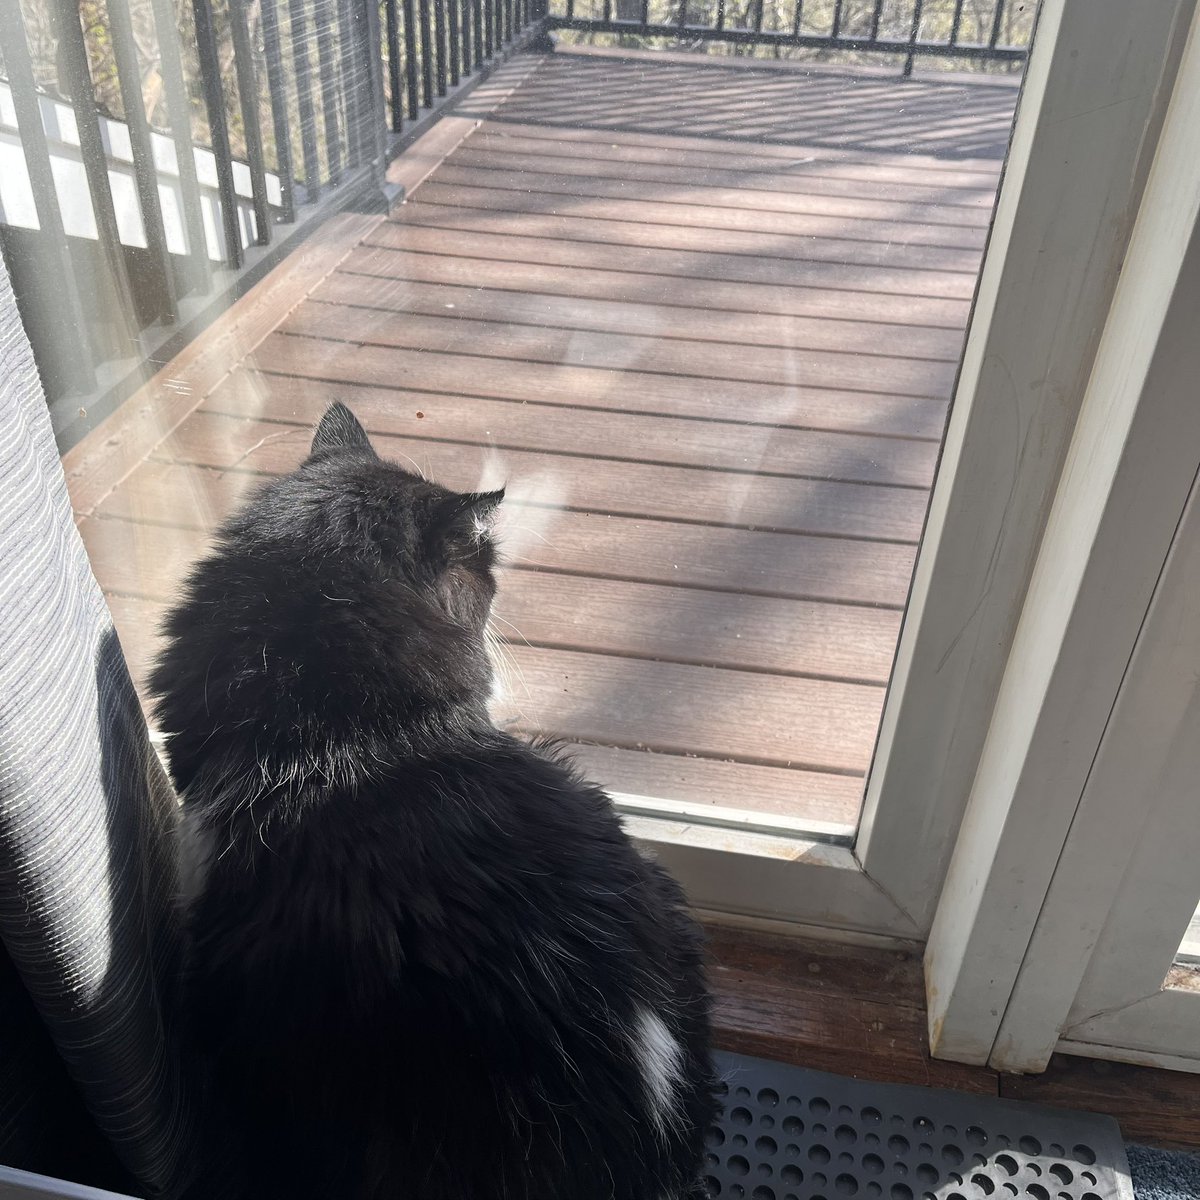 This is Clyde.  He’s enjoying the birdies and the sun on his birthday.  He’s 19 years old today.  He’s an old guy.  He tends to sleep a lot now.  I adopted him when he was 13.  He’s been a wonderful senior cat!
#clyde #seniorcat #adopted